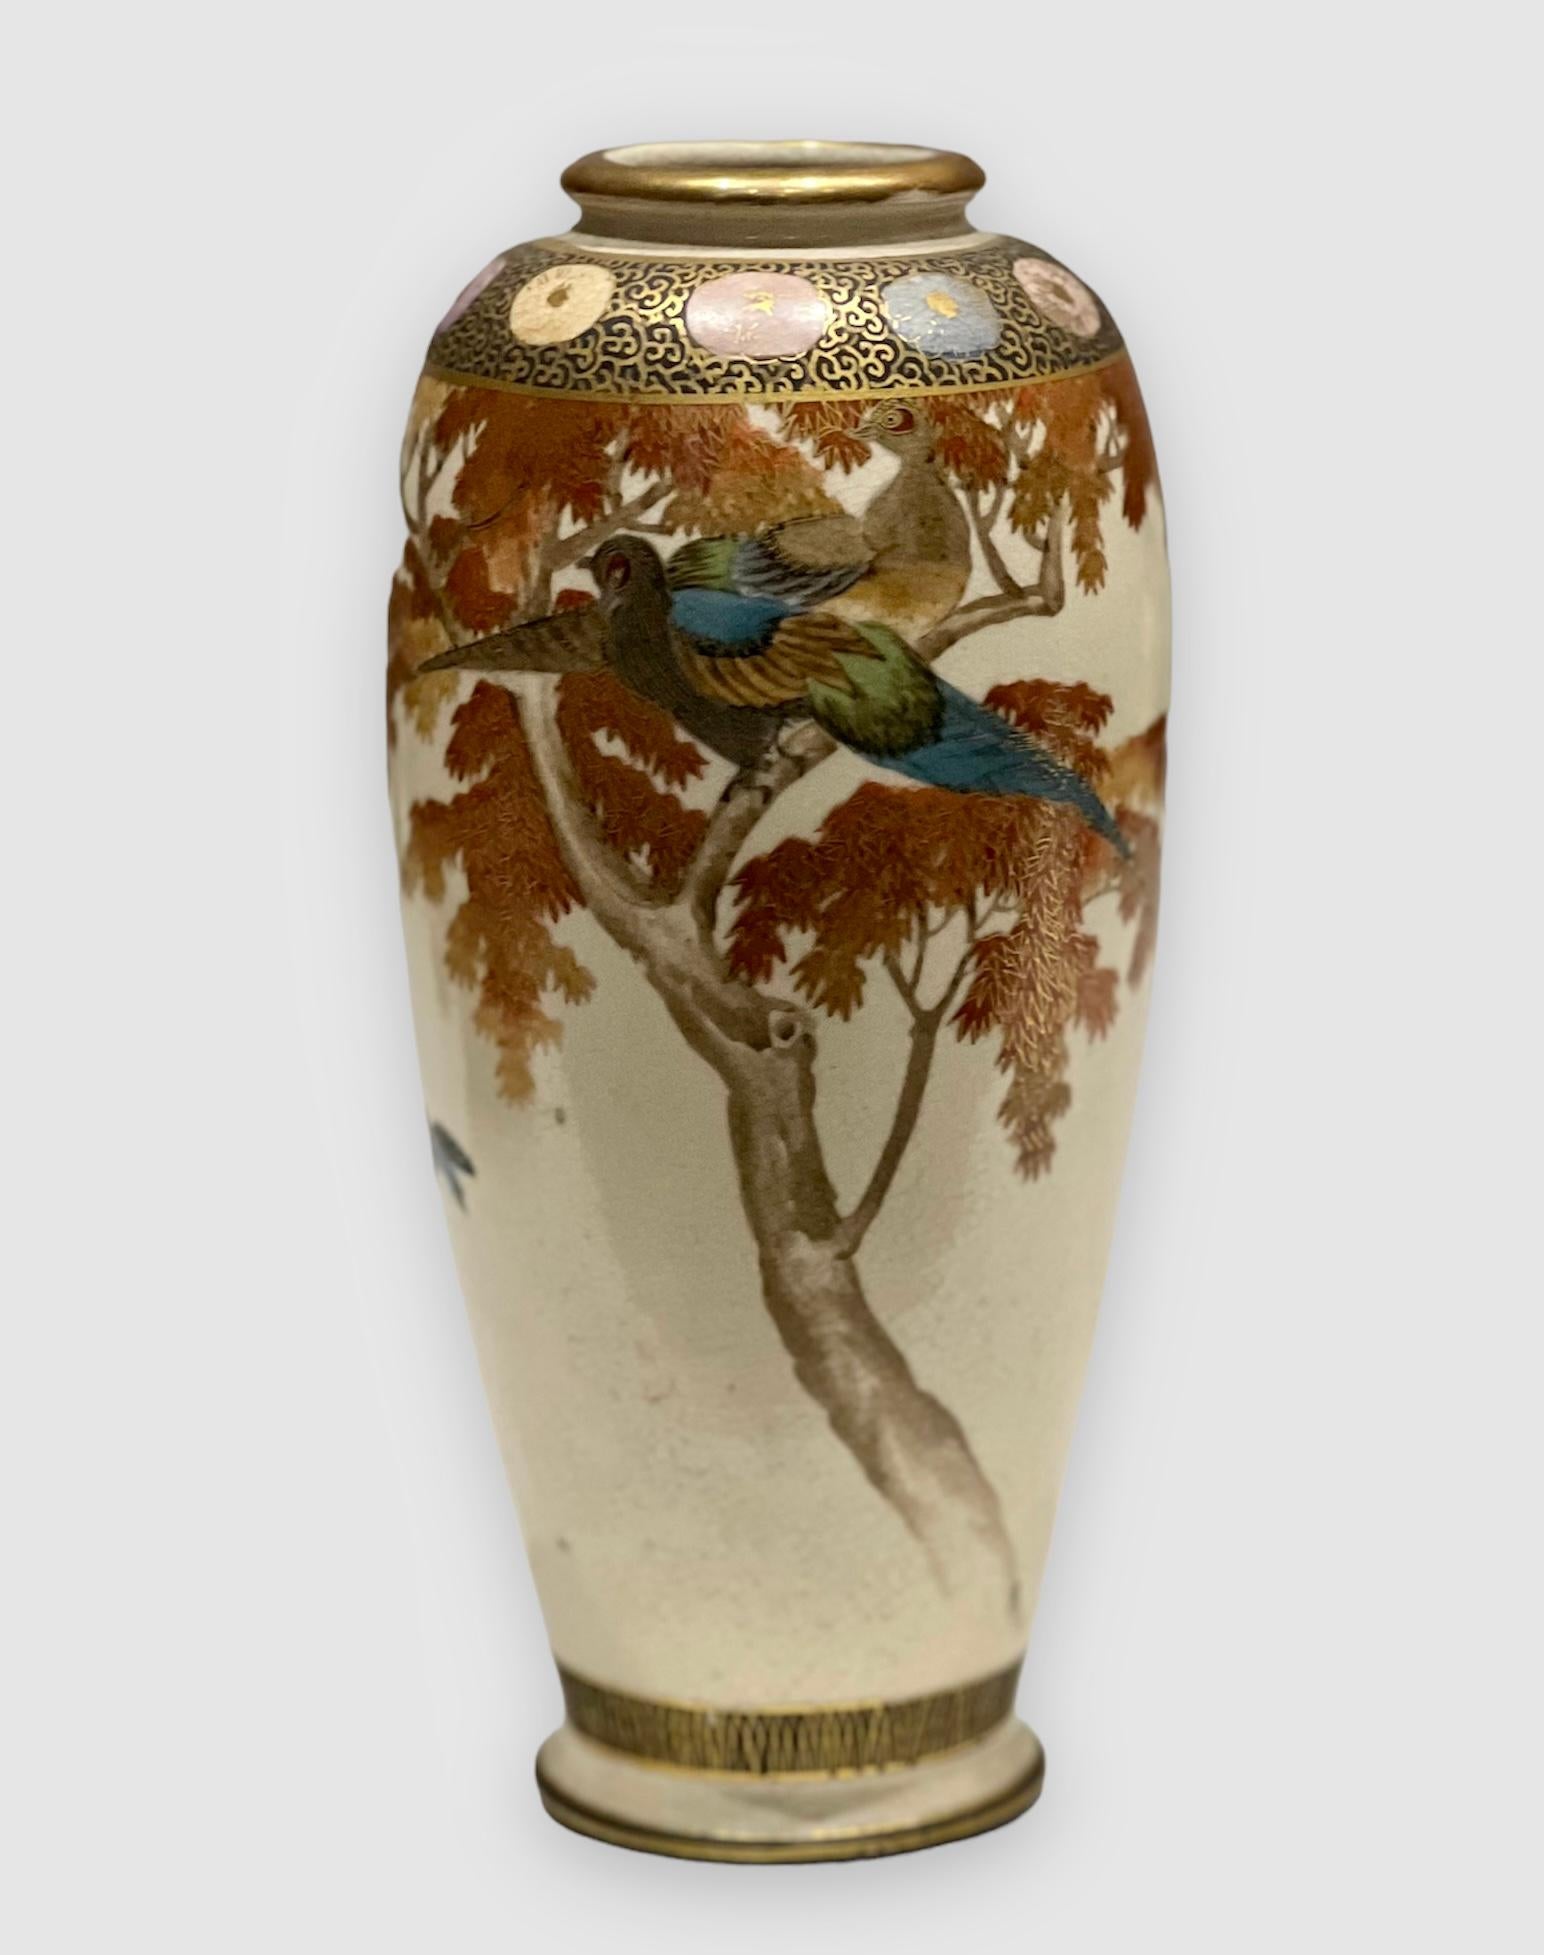 A fine antique Japanese Satsuma vase. 
Meiji period. Signed.



A very nice 19th century Japanese Satsuma ware vase of a relatively slender form with rolled rims. The decoration makes extensive use of gilt lining and pointillism to highlight